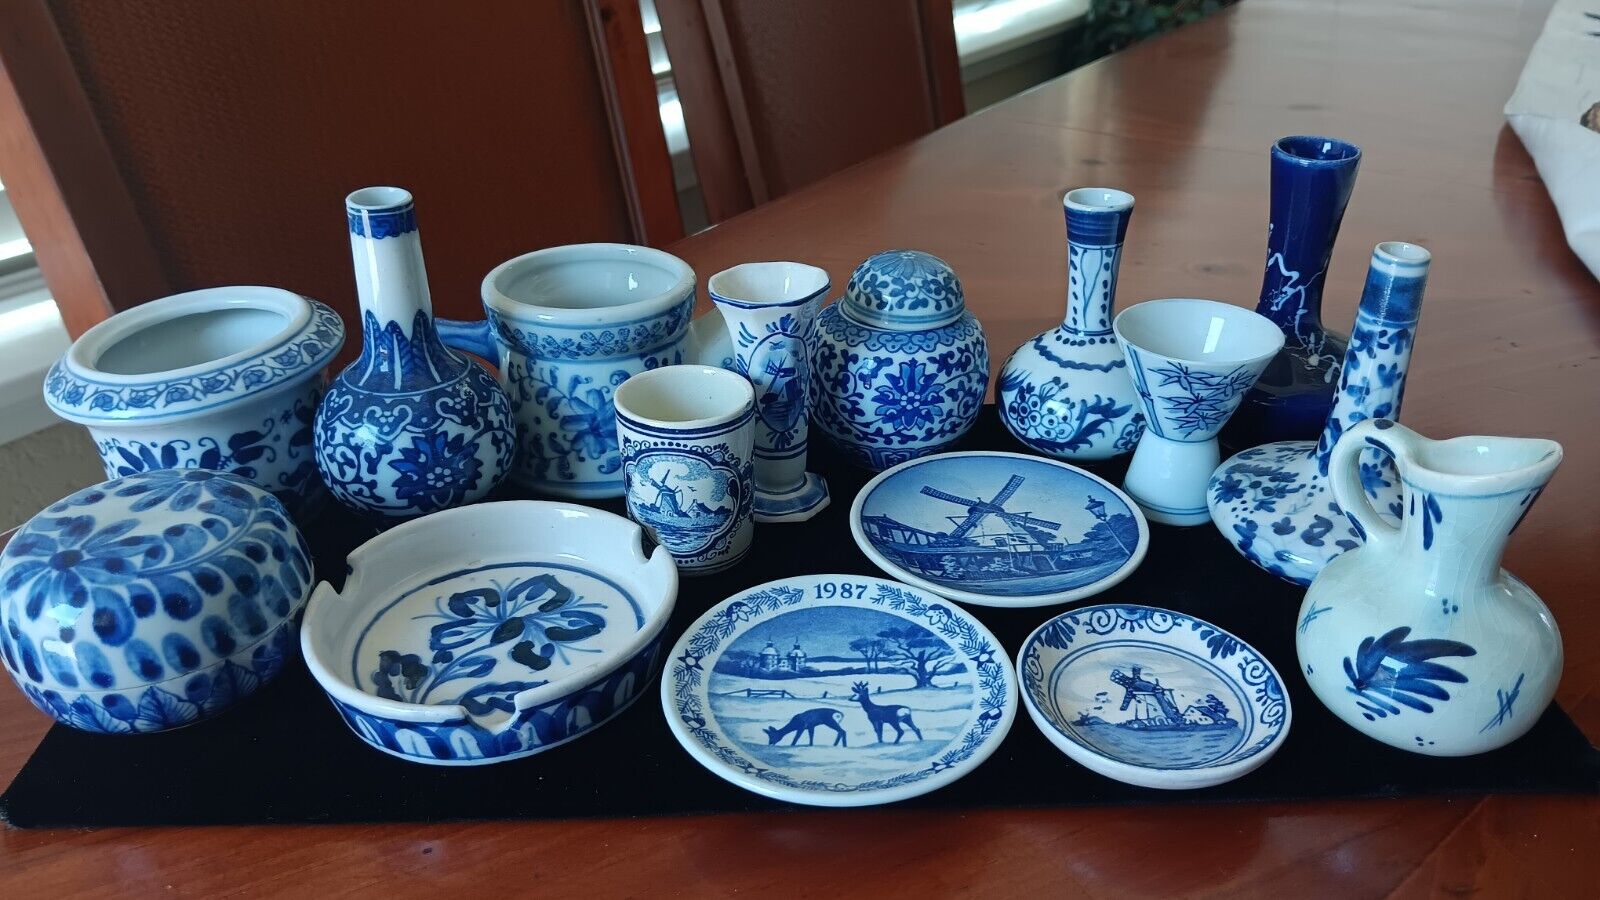 Vintage Mixed Lot of 18 pc Blue Delft Style Ceramic Plates, Cups Vases Etc.